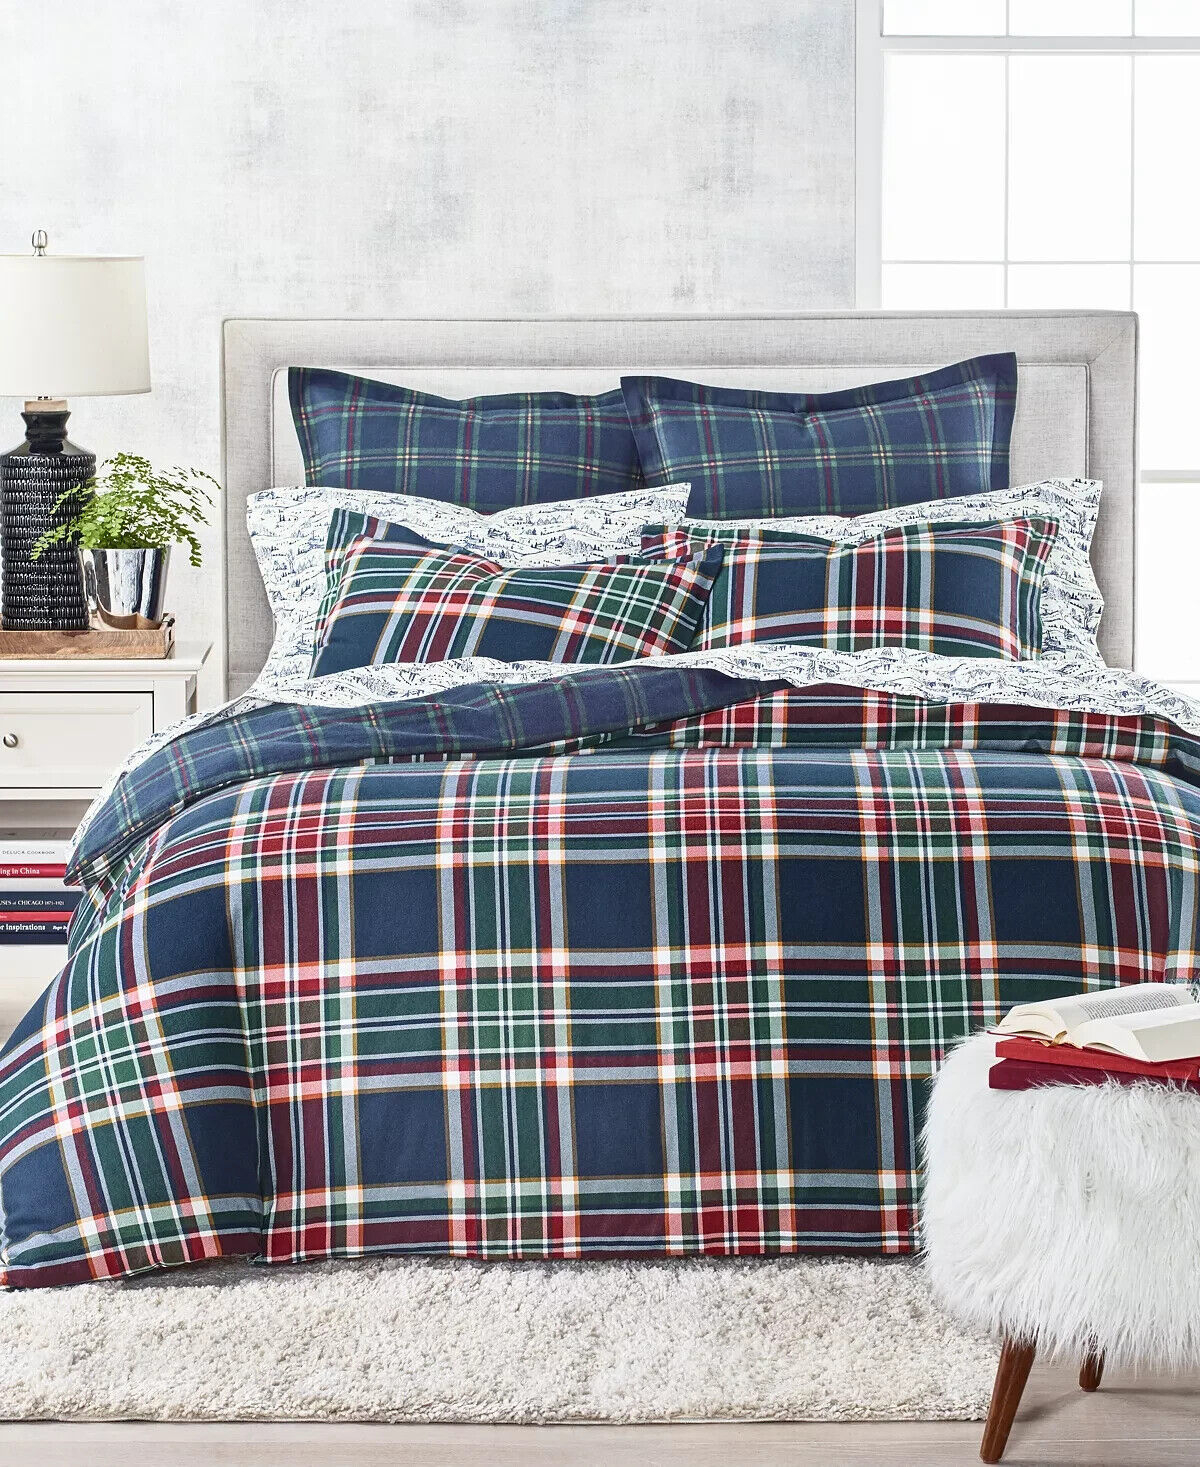 Martha Stewart Navy Plaid Holiday Flannel Duvet Cover Set, Twin or Full/Queen - $159.99 - $229.99